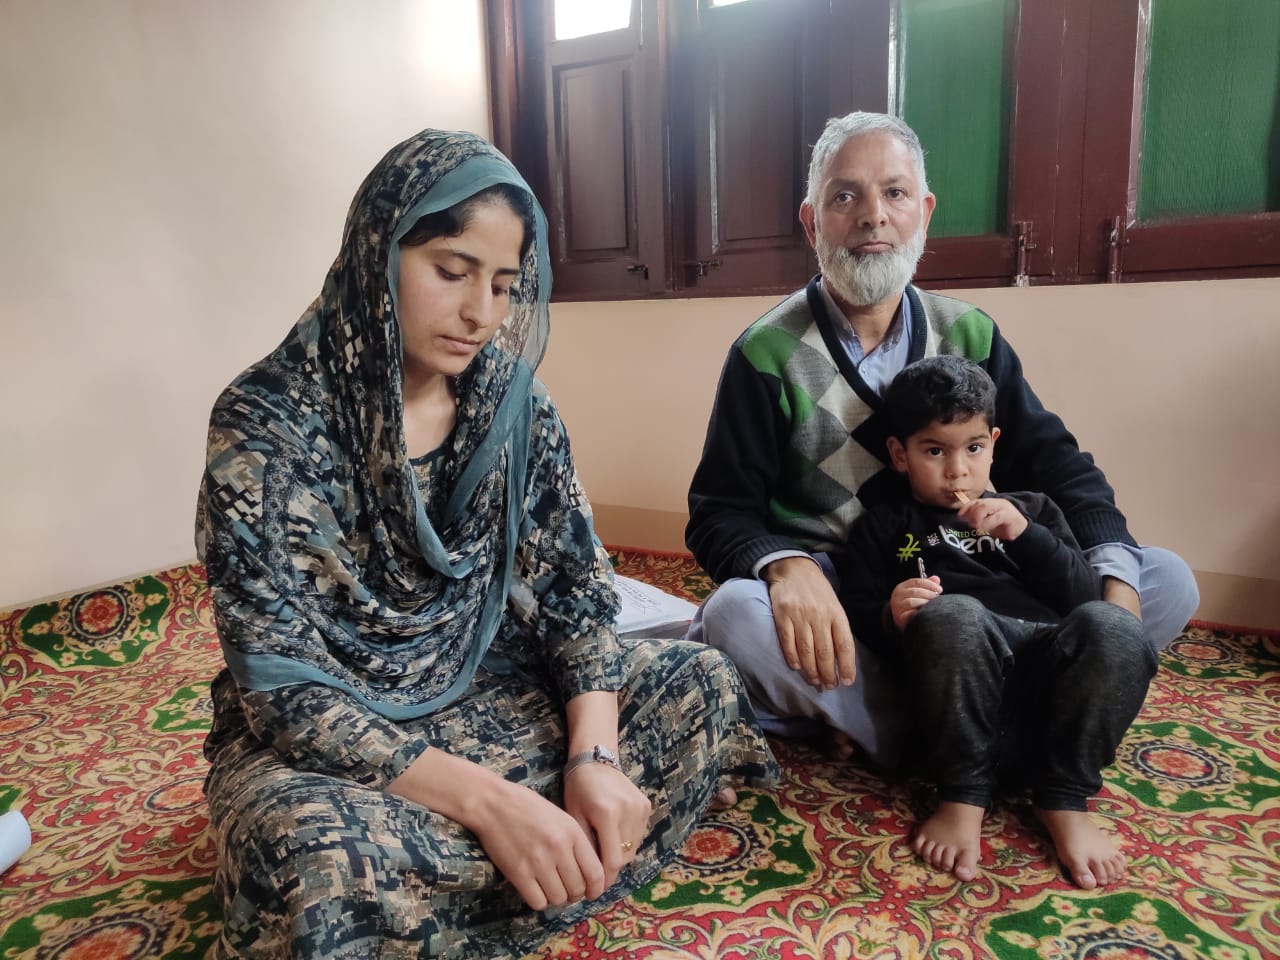 Ghulam Rasool Dar, with his daughter and grandson, at their home in Chadoora, Budgam in Kashmir